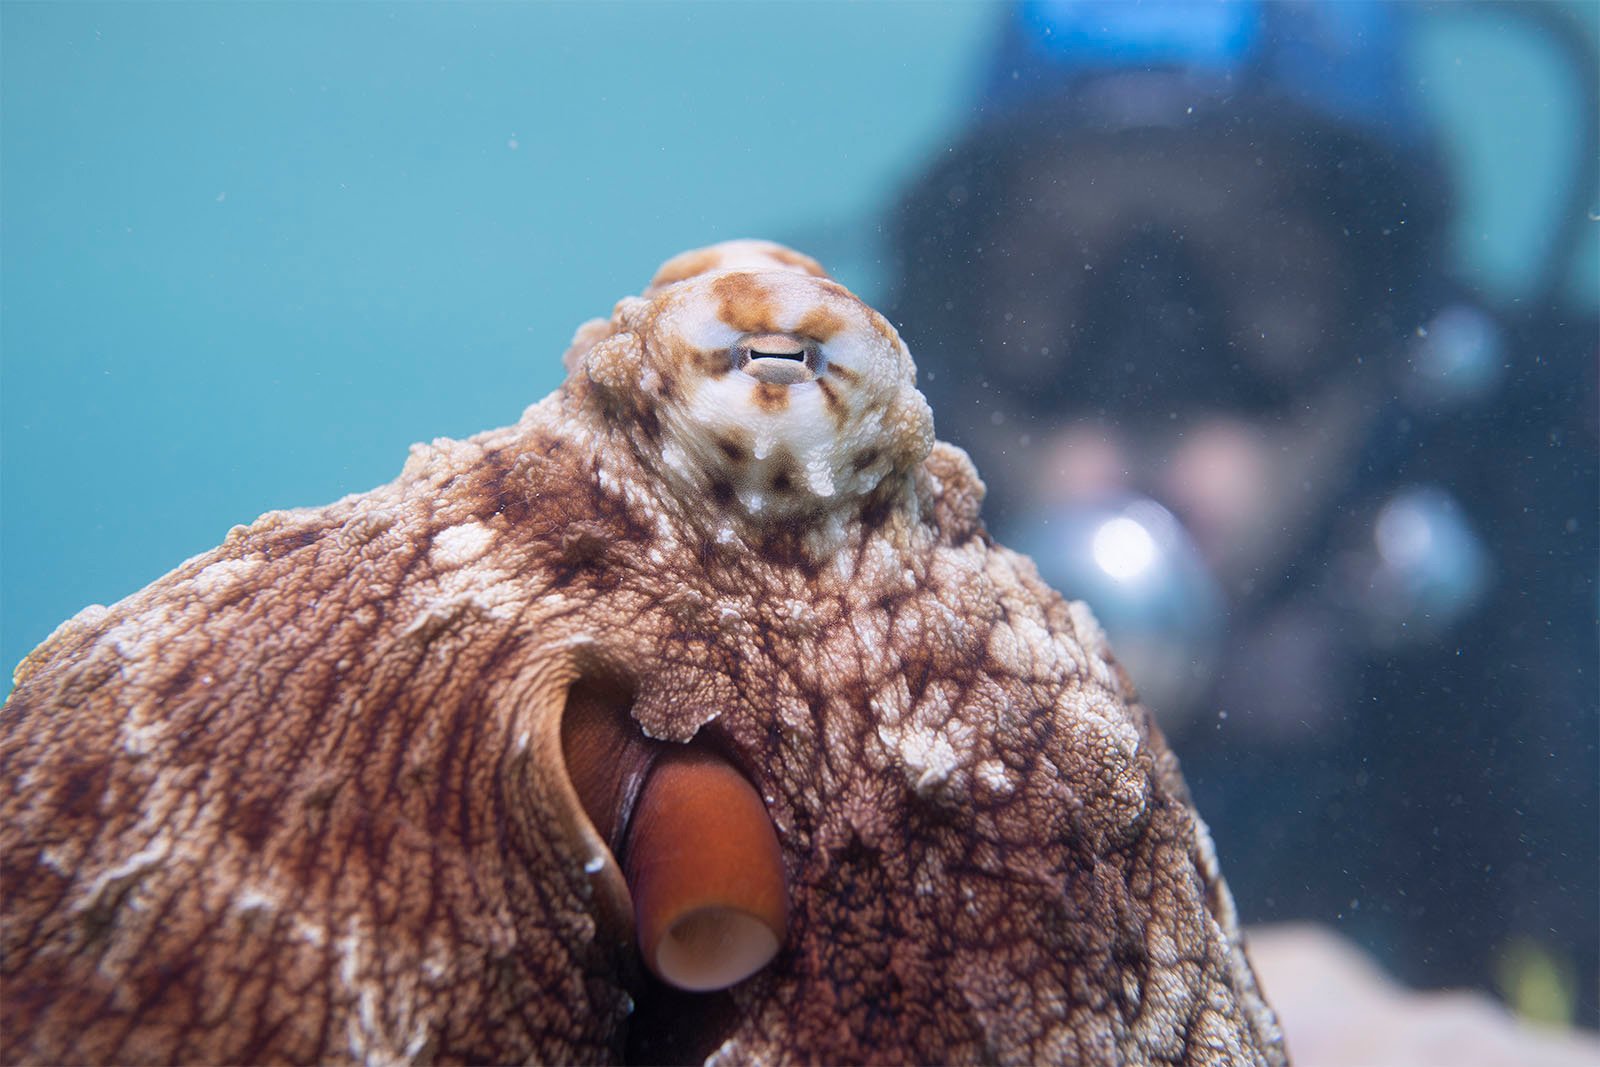 An octopus with textured skin and extended tentacles sits in shallow water, its large eyes focused forward. in the blurry background, a diver observes it closely.